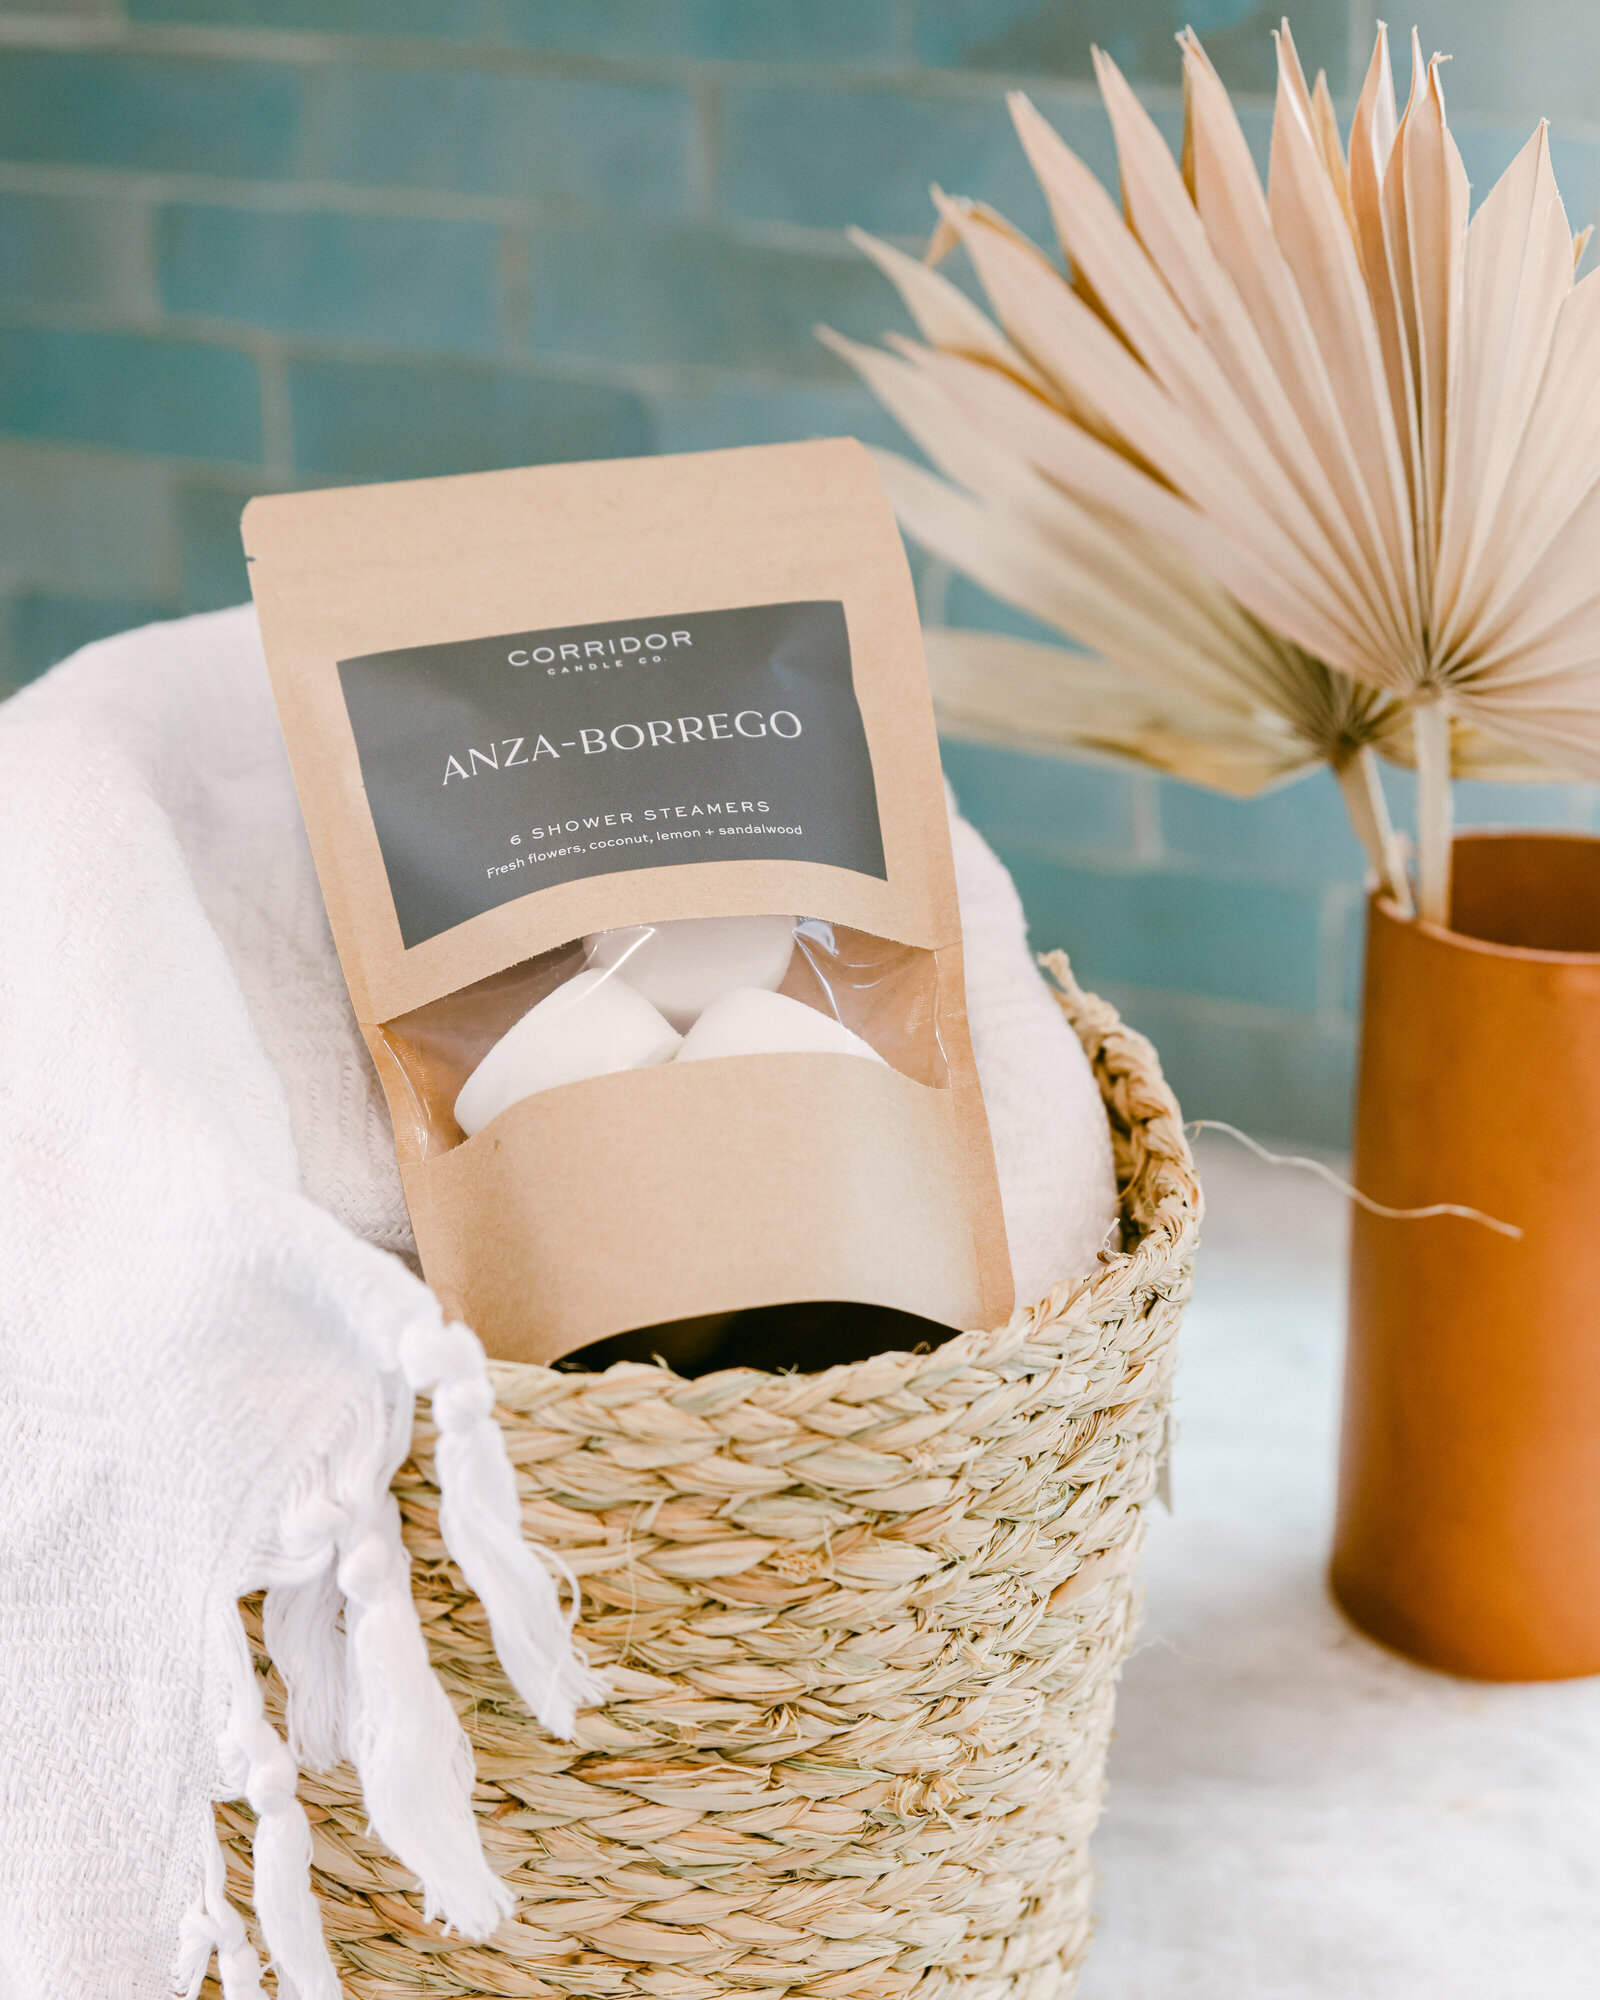 chelsea Loren branding photographer San Diego capturing boho shower steamers by Corridor Candle Co